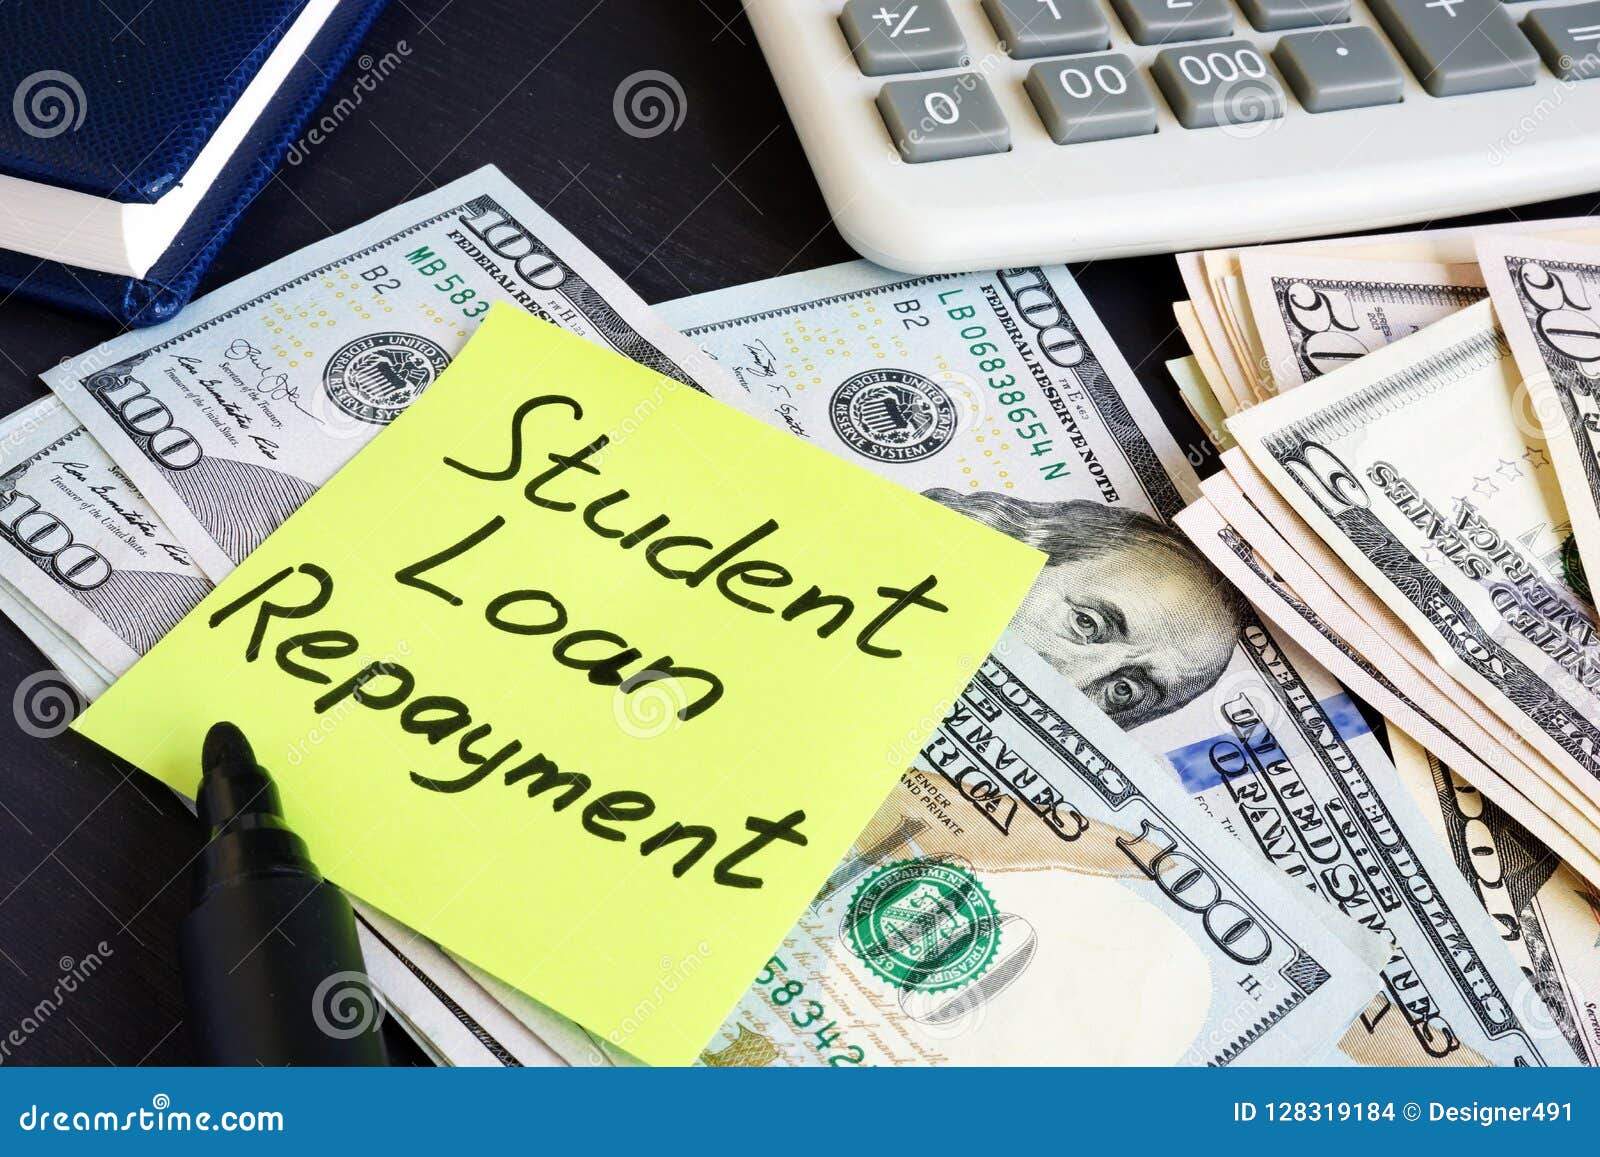 money for student loan repayment on a table.